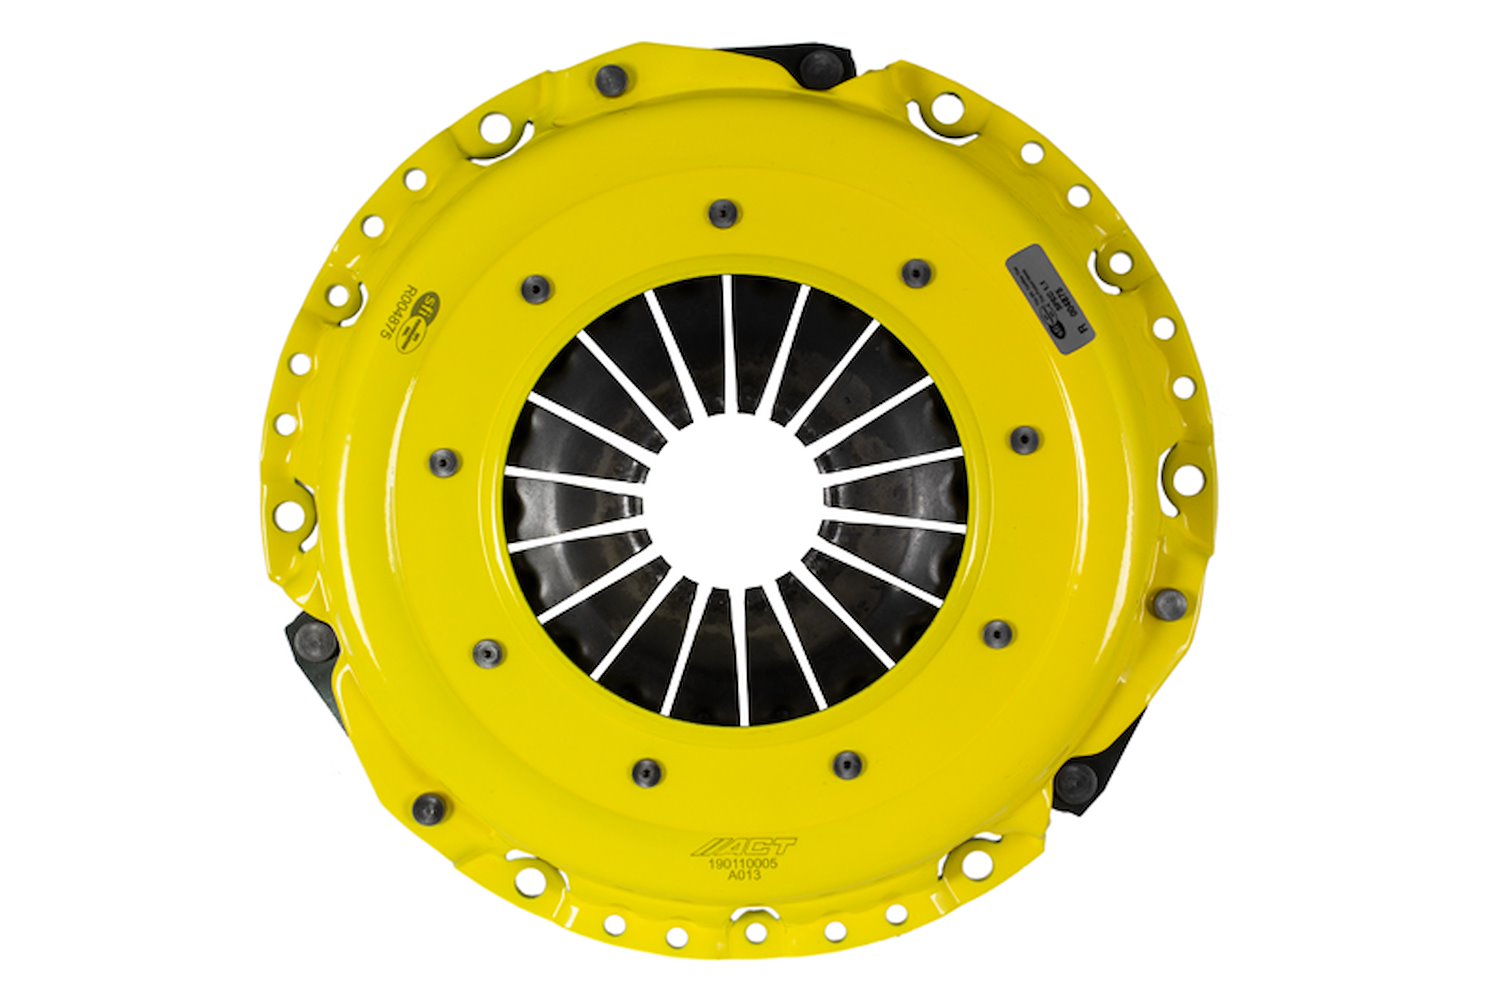 Heavy-Duty Transmission Clutch Pressure Plate Fits Select Audi/Volkswagen